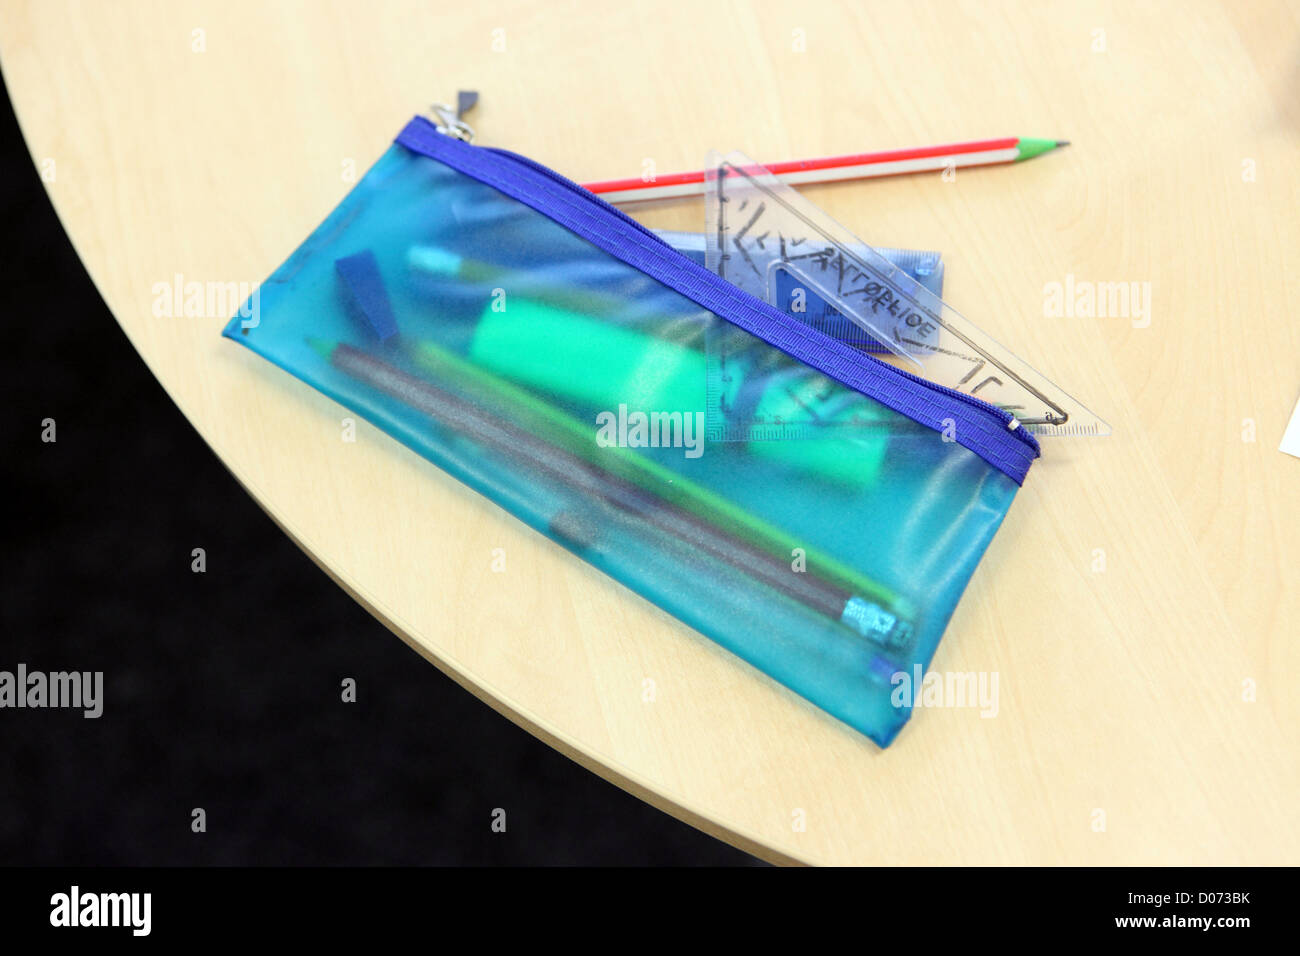 Transparent blue plastic school pencil case on tabletop with pencils and set square, studio photograph Stock Photo